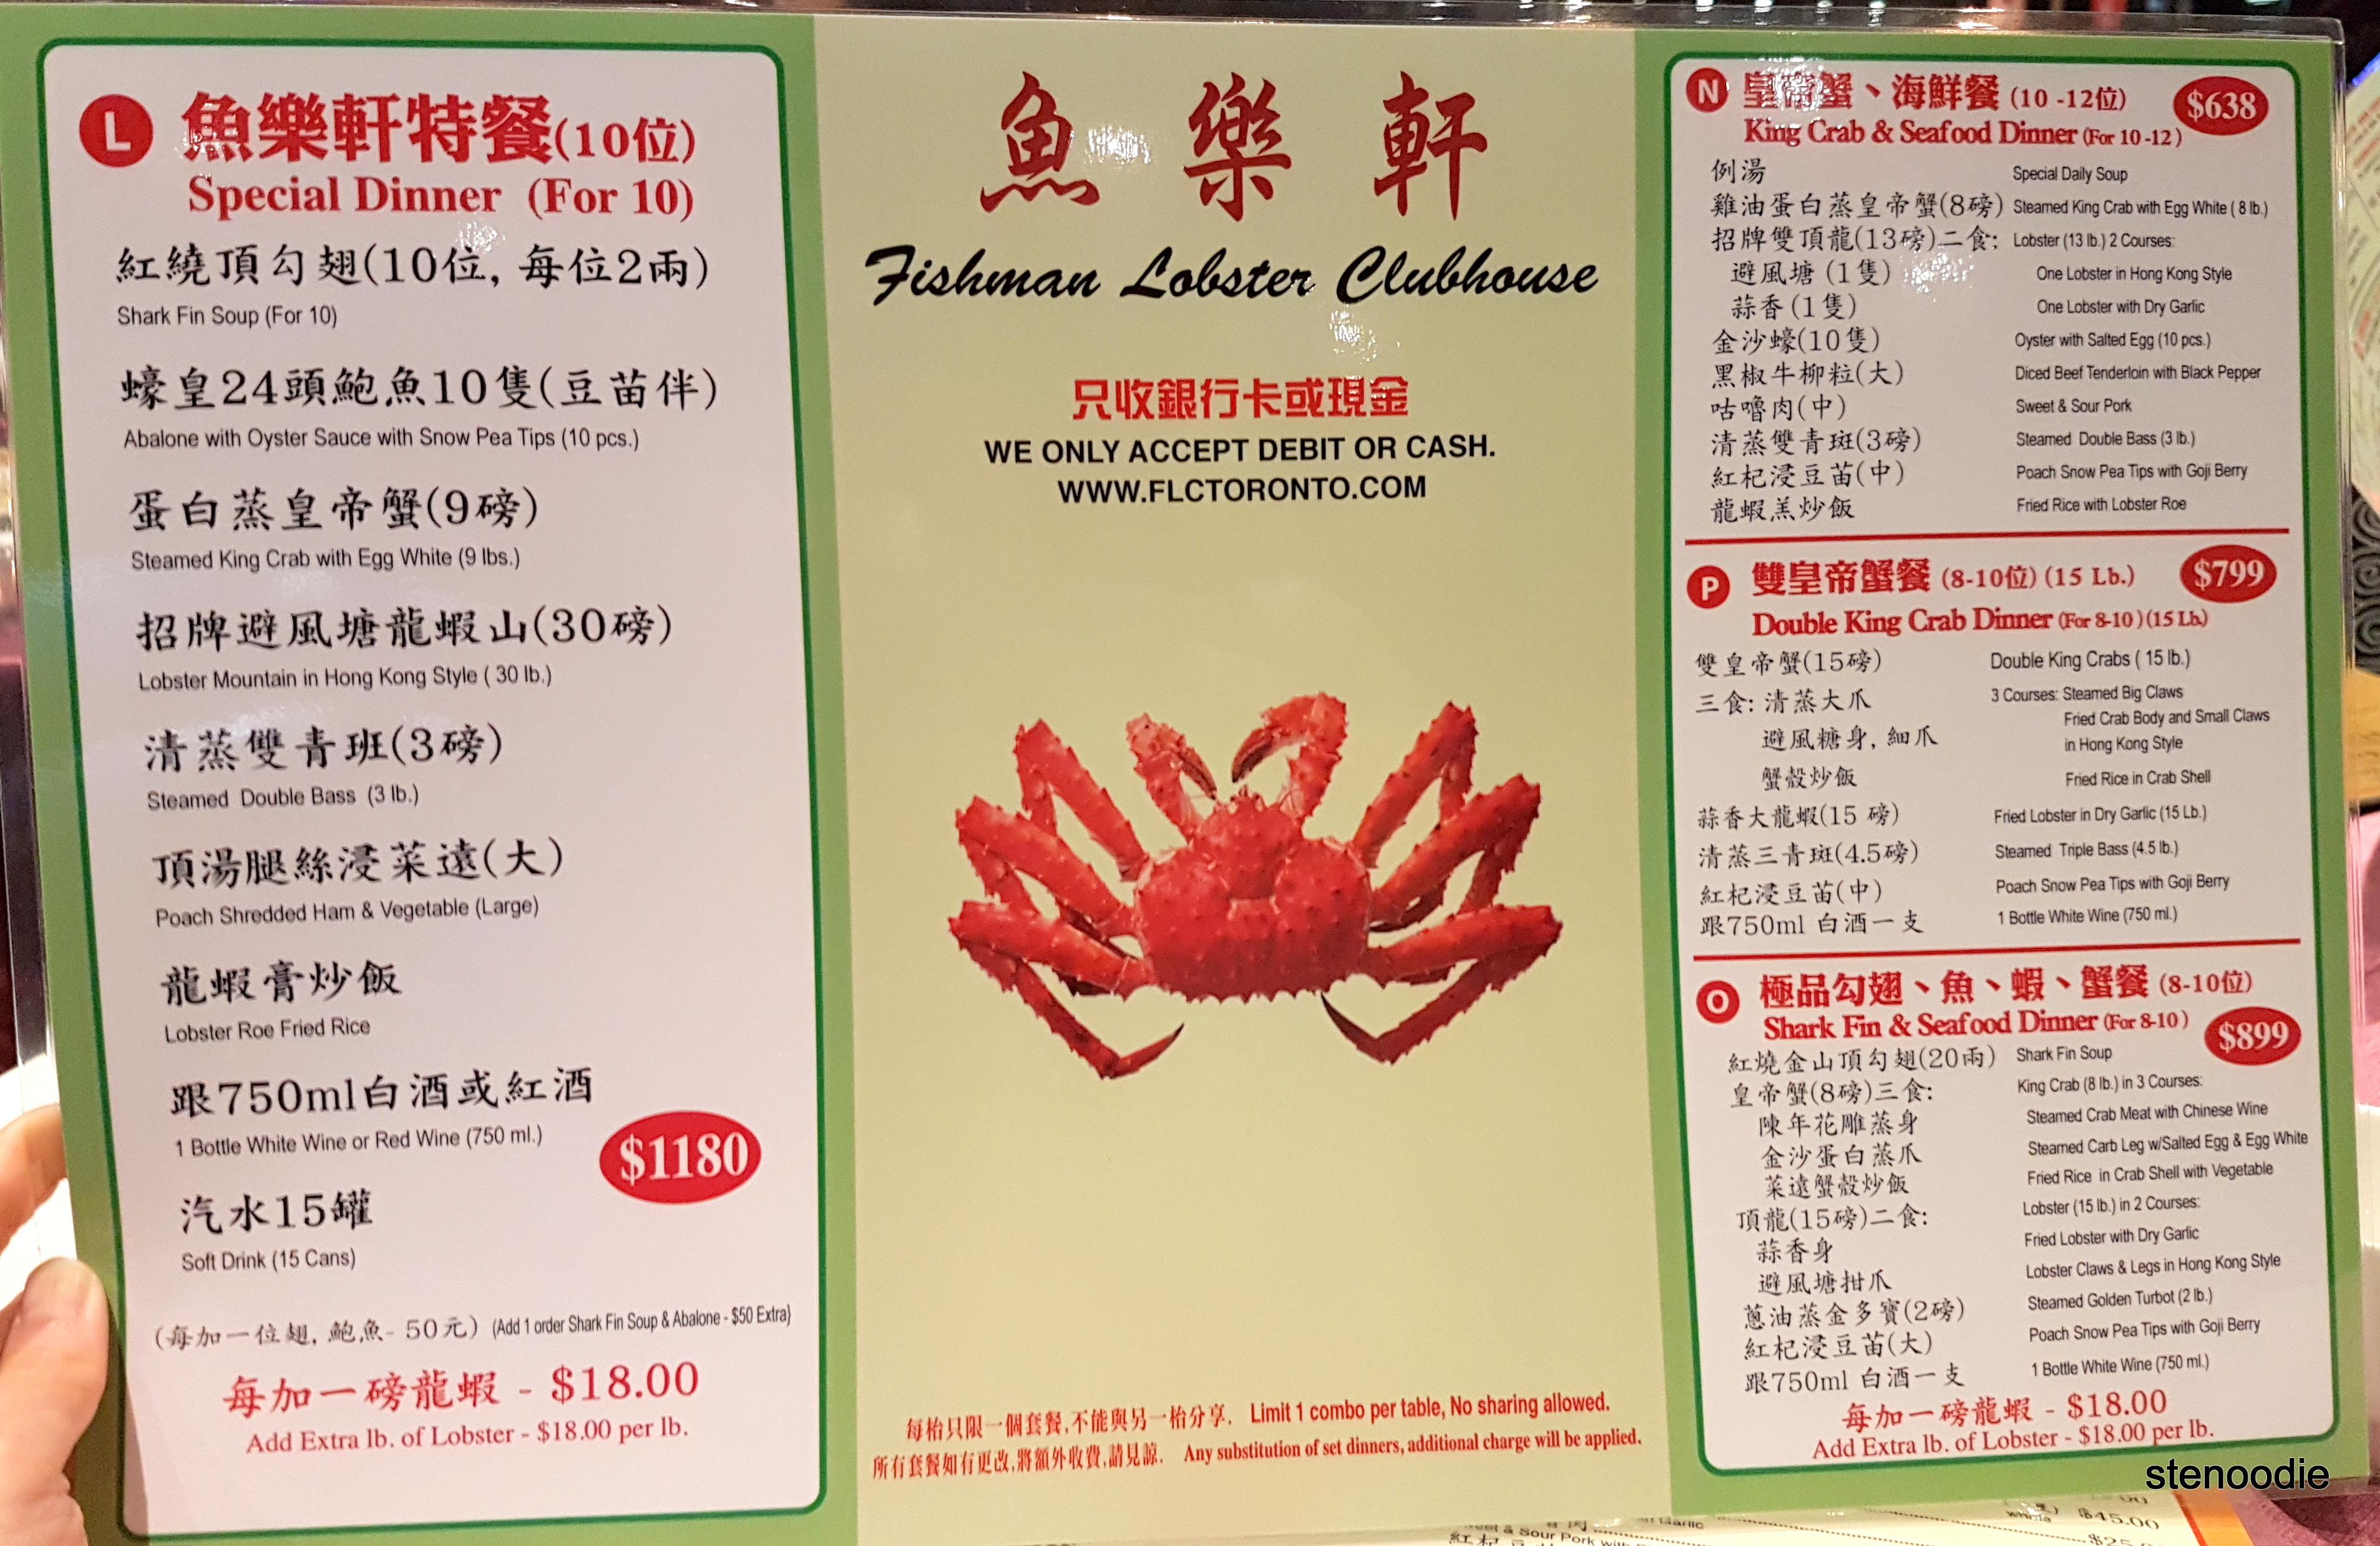 Fishman Lobster Clubhouse Restaurant menu and prices